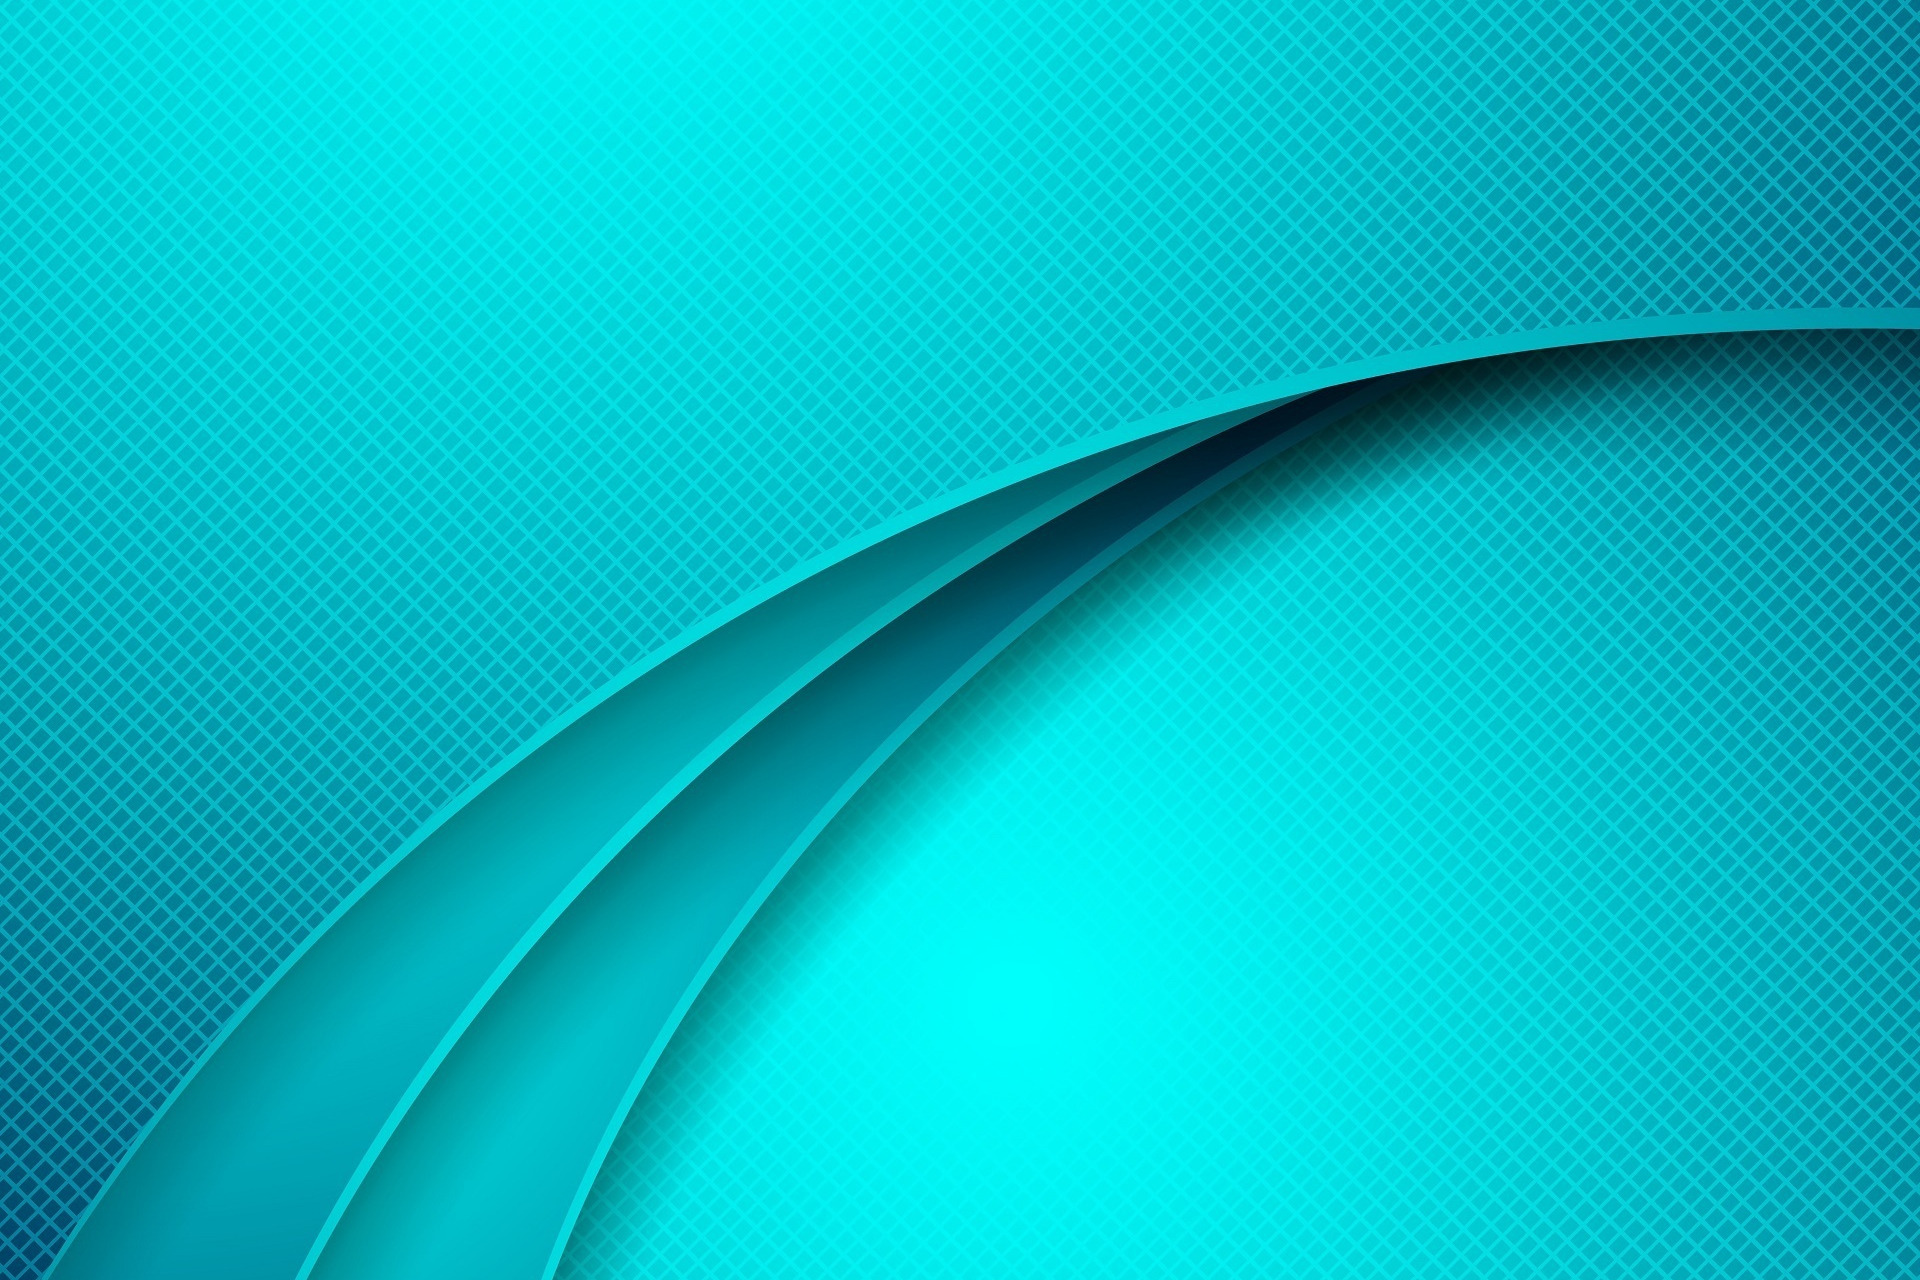 General 1920x1280 abstract turquoise grid simple background minimalism digital art cyan